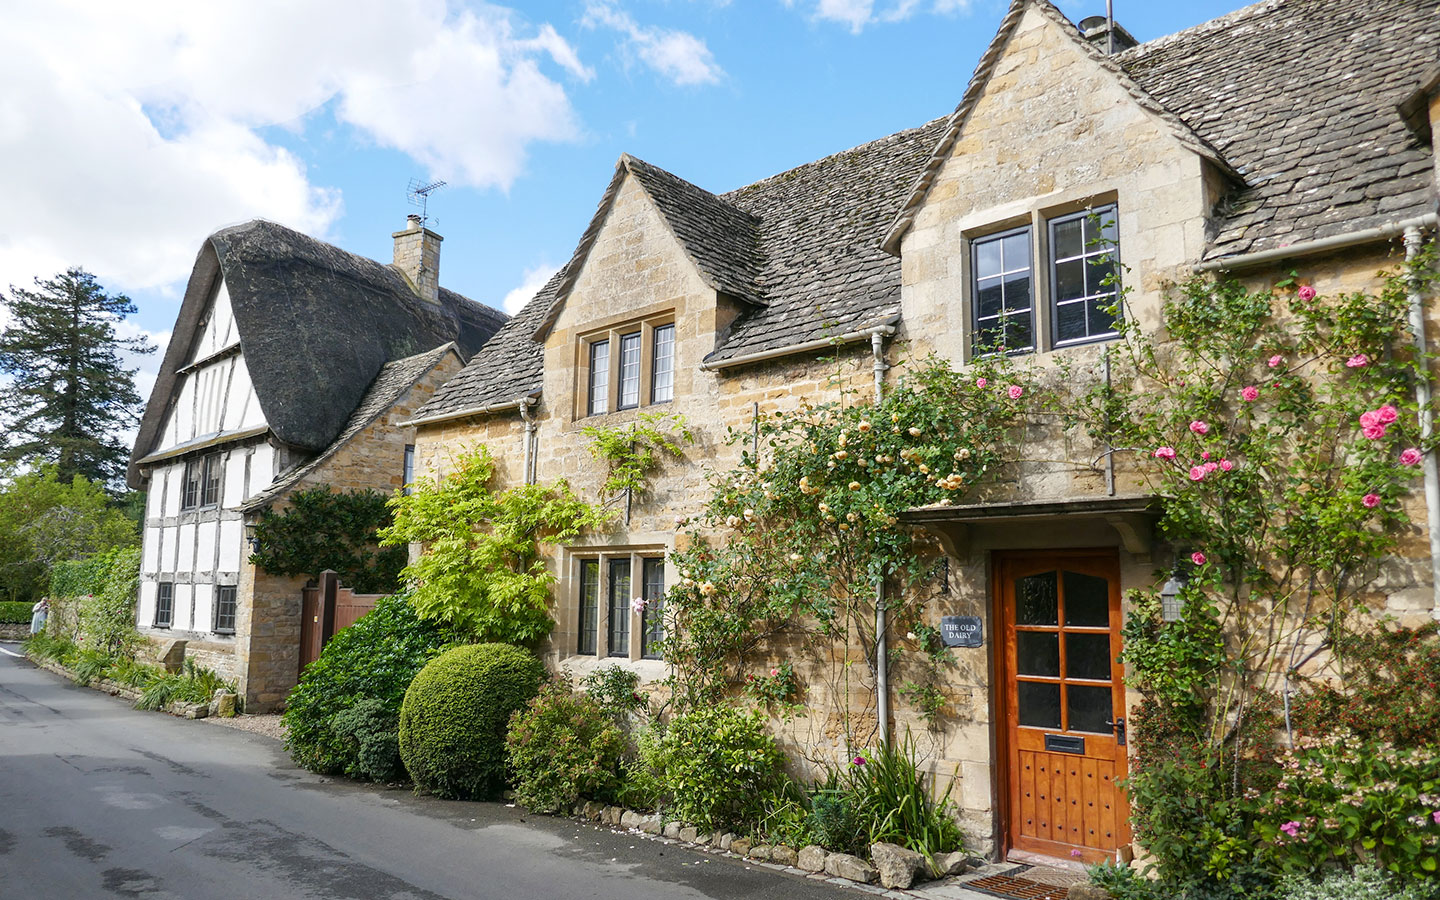 How to plan a day trip from London to Cotswolds (with or without a